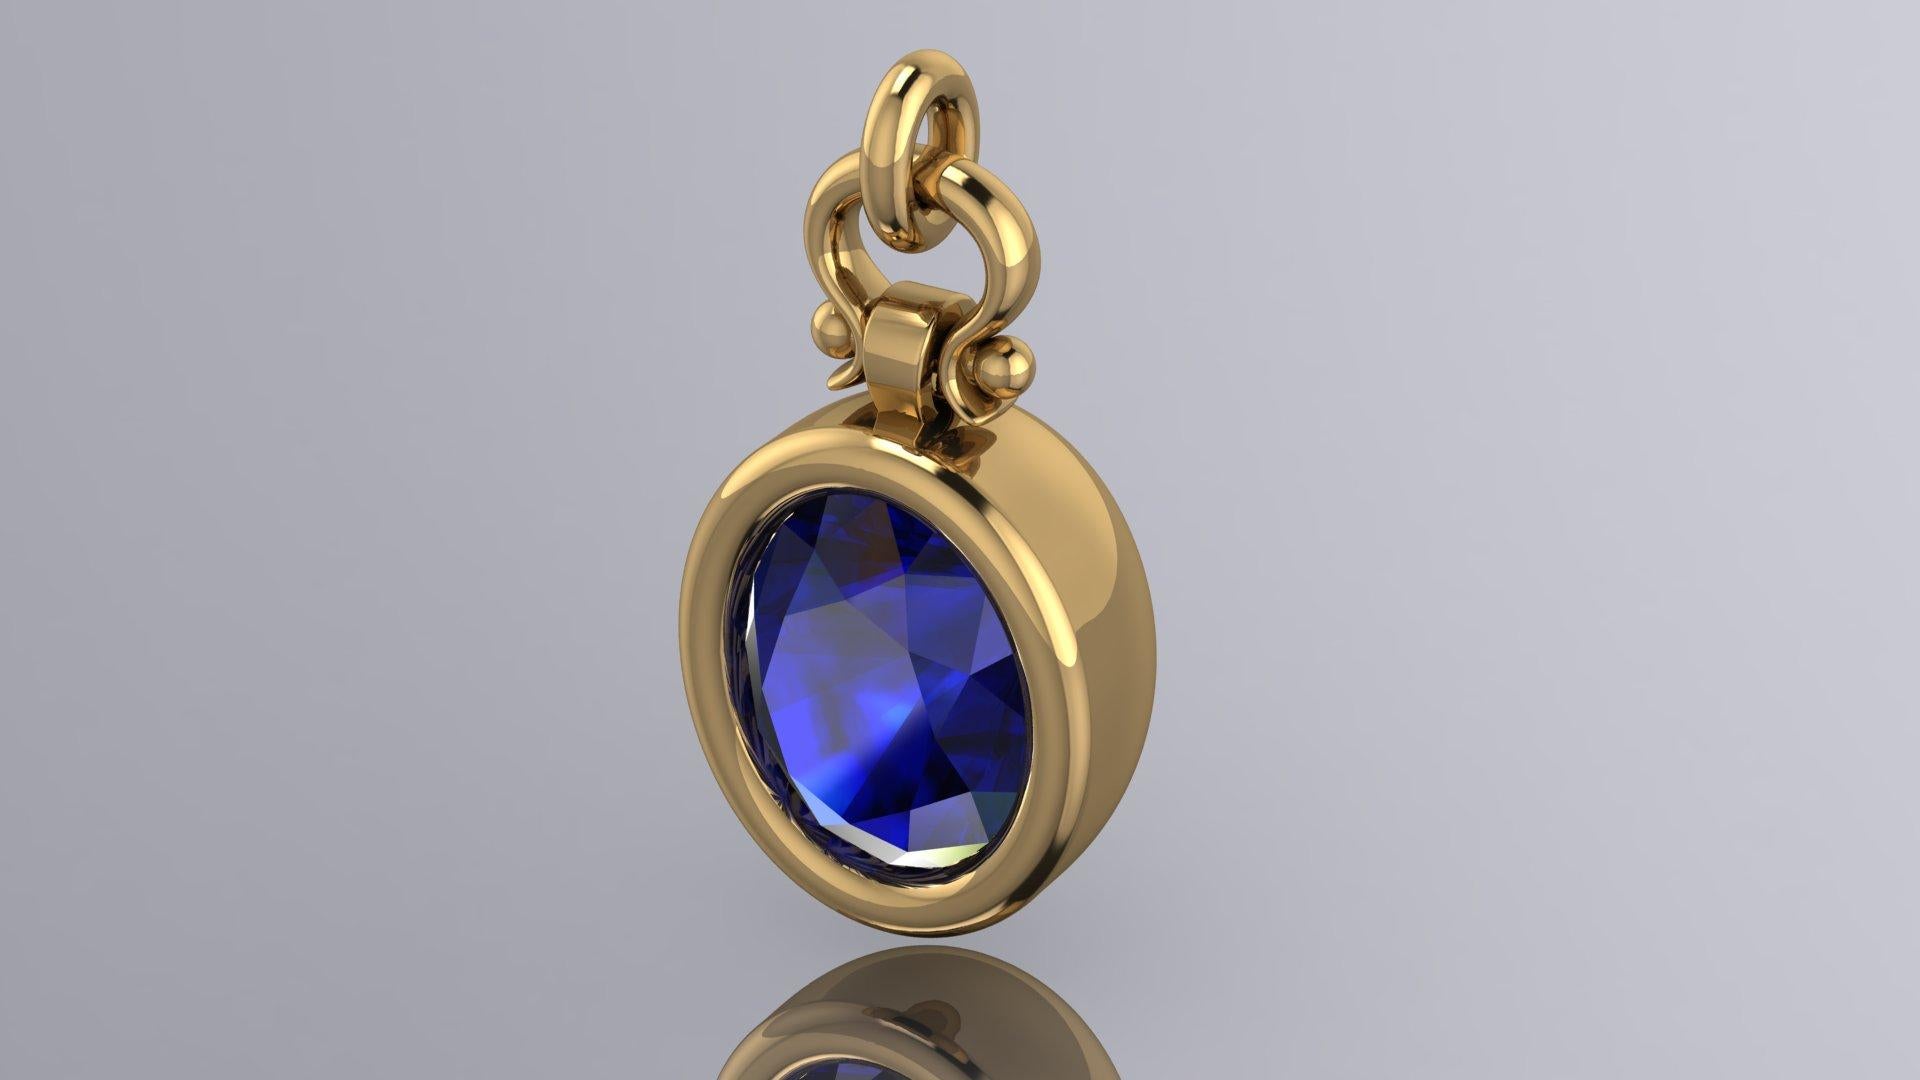 Berberyn Certified 3.08 Carat Oval Blue Sapphire Custom Pendant Necklace in 18k In New Condition For Sale In Chicago, IL